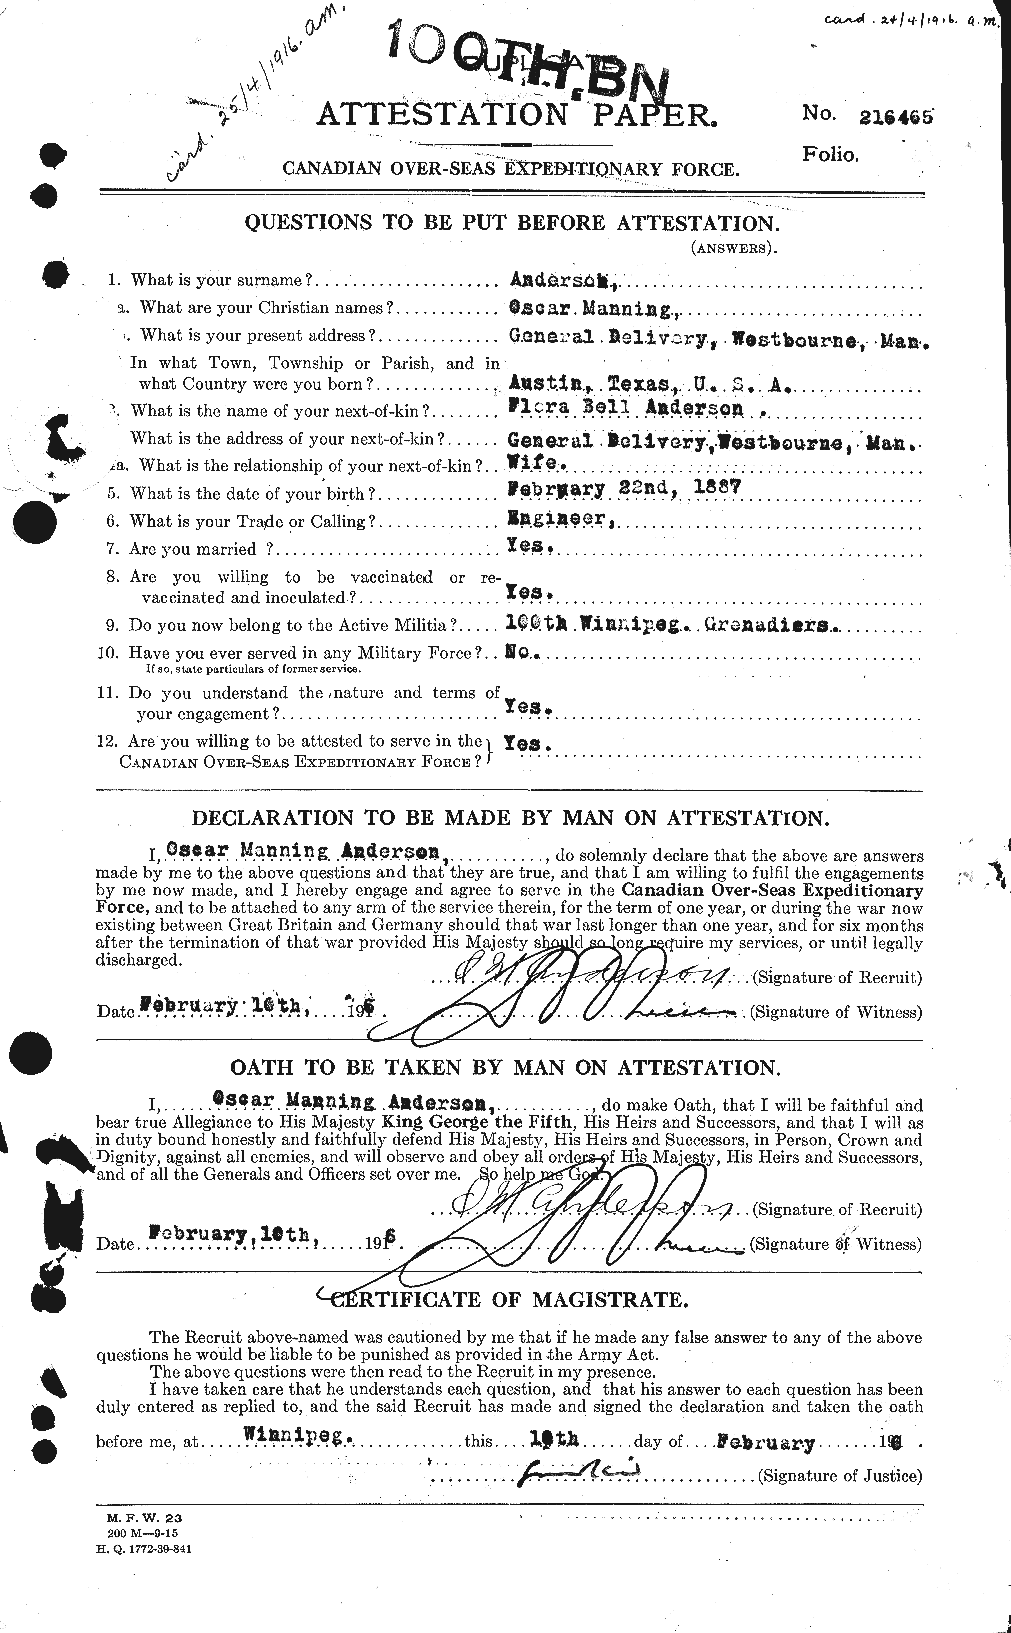 Personnel Records of the First World War - CEF 207376a